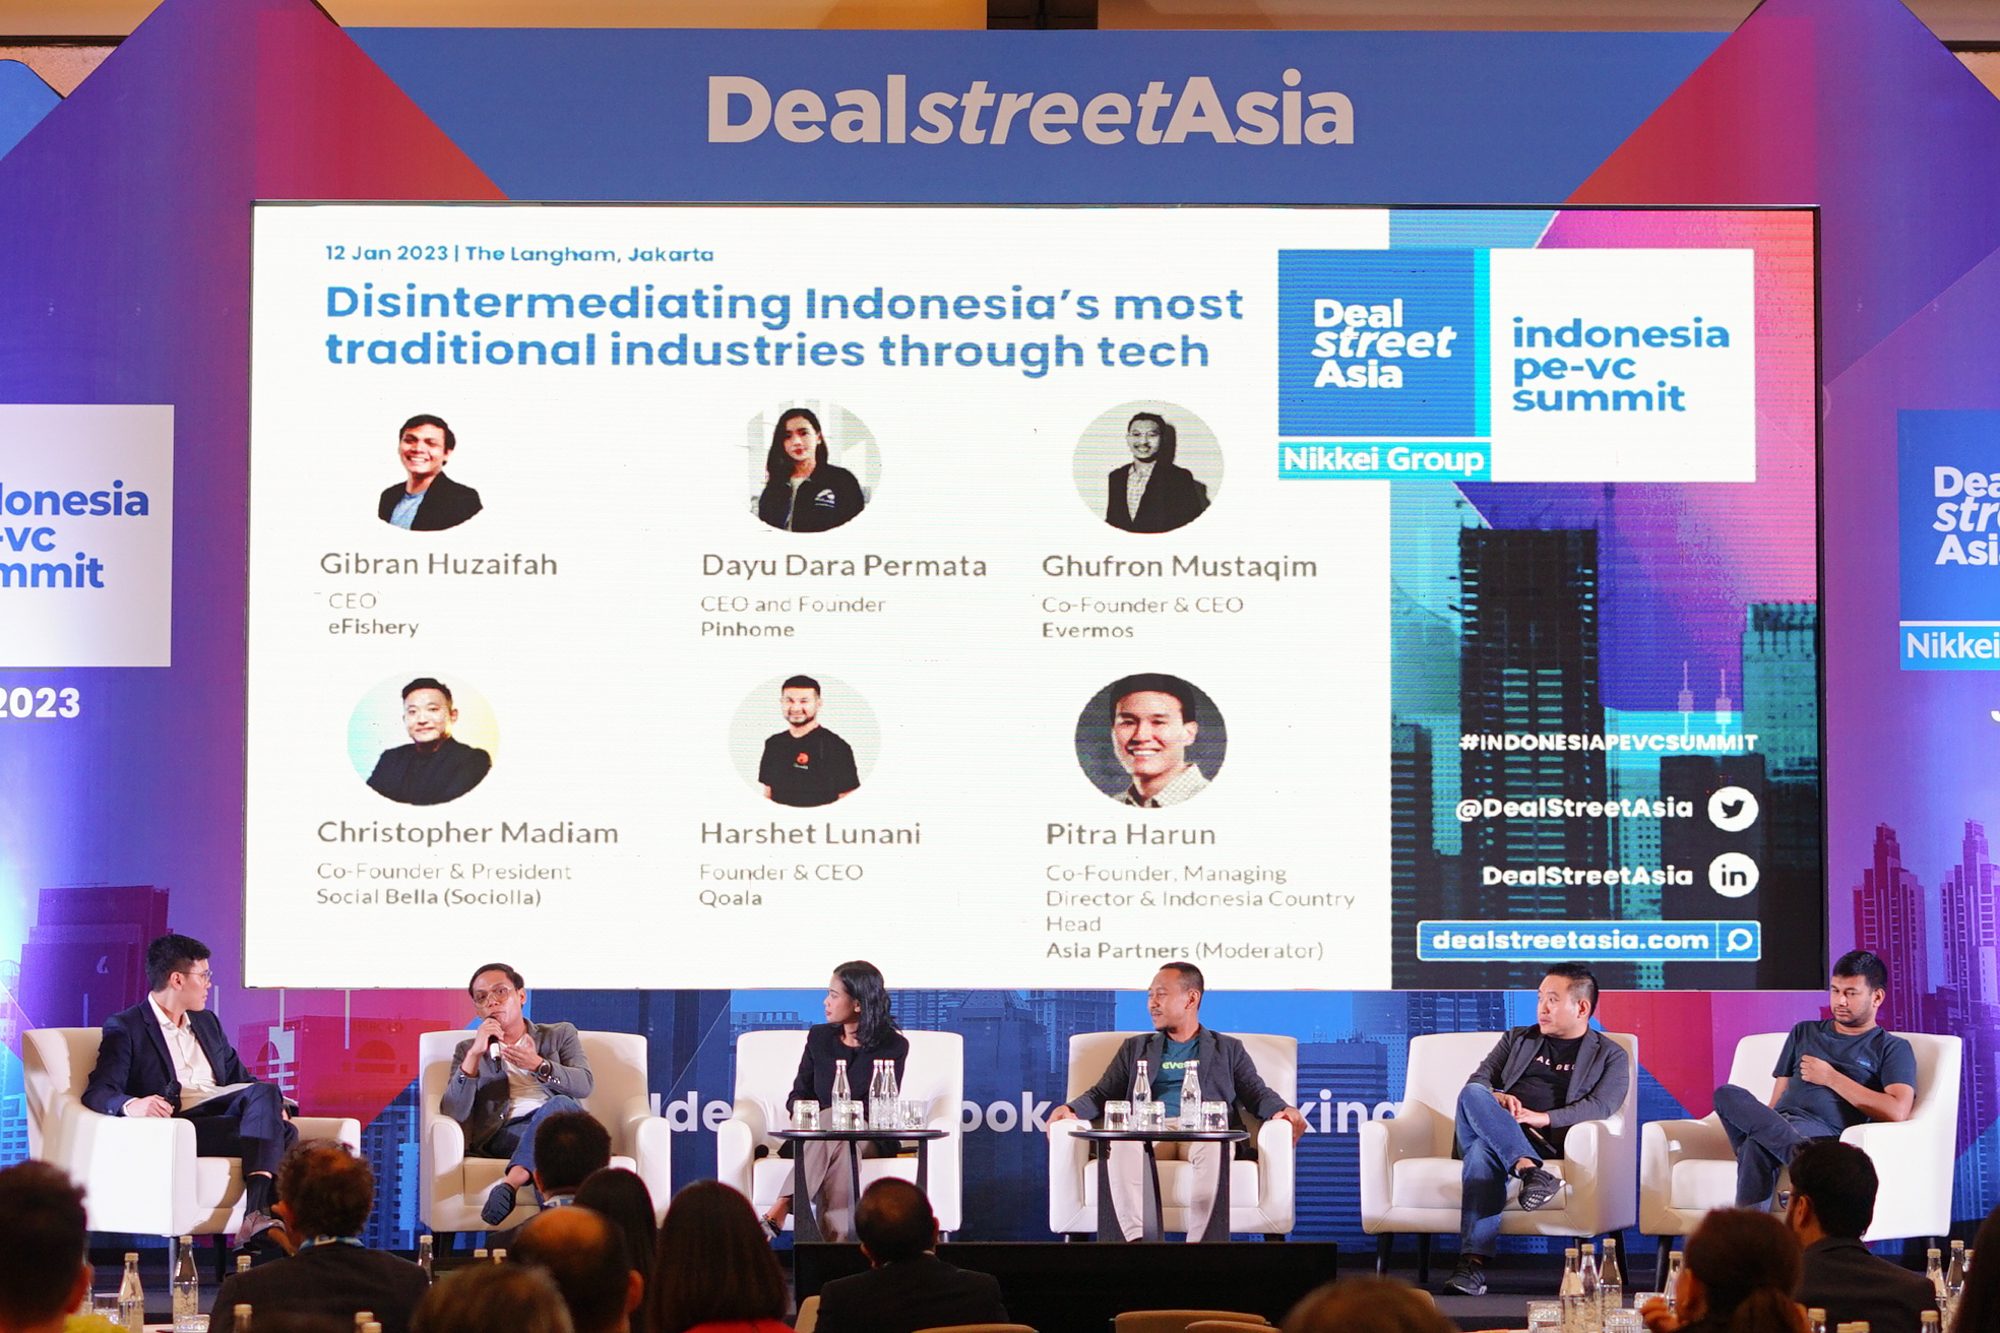 Founders see tech as key driver to building sustainable value chain in Indonesia